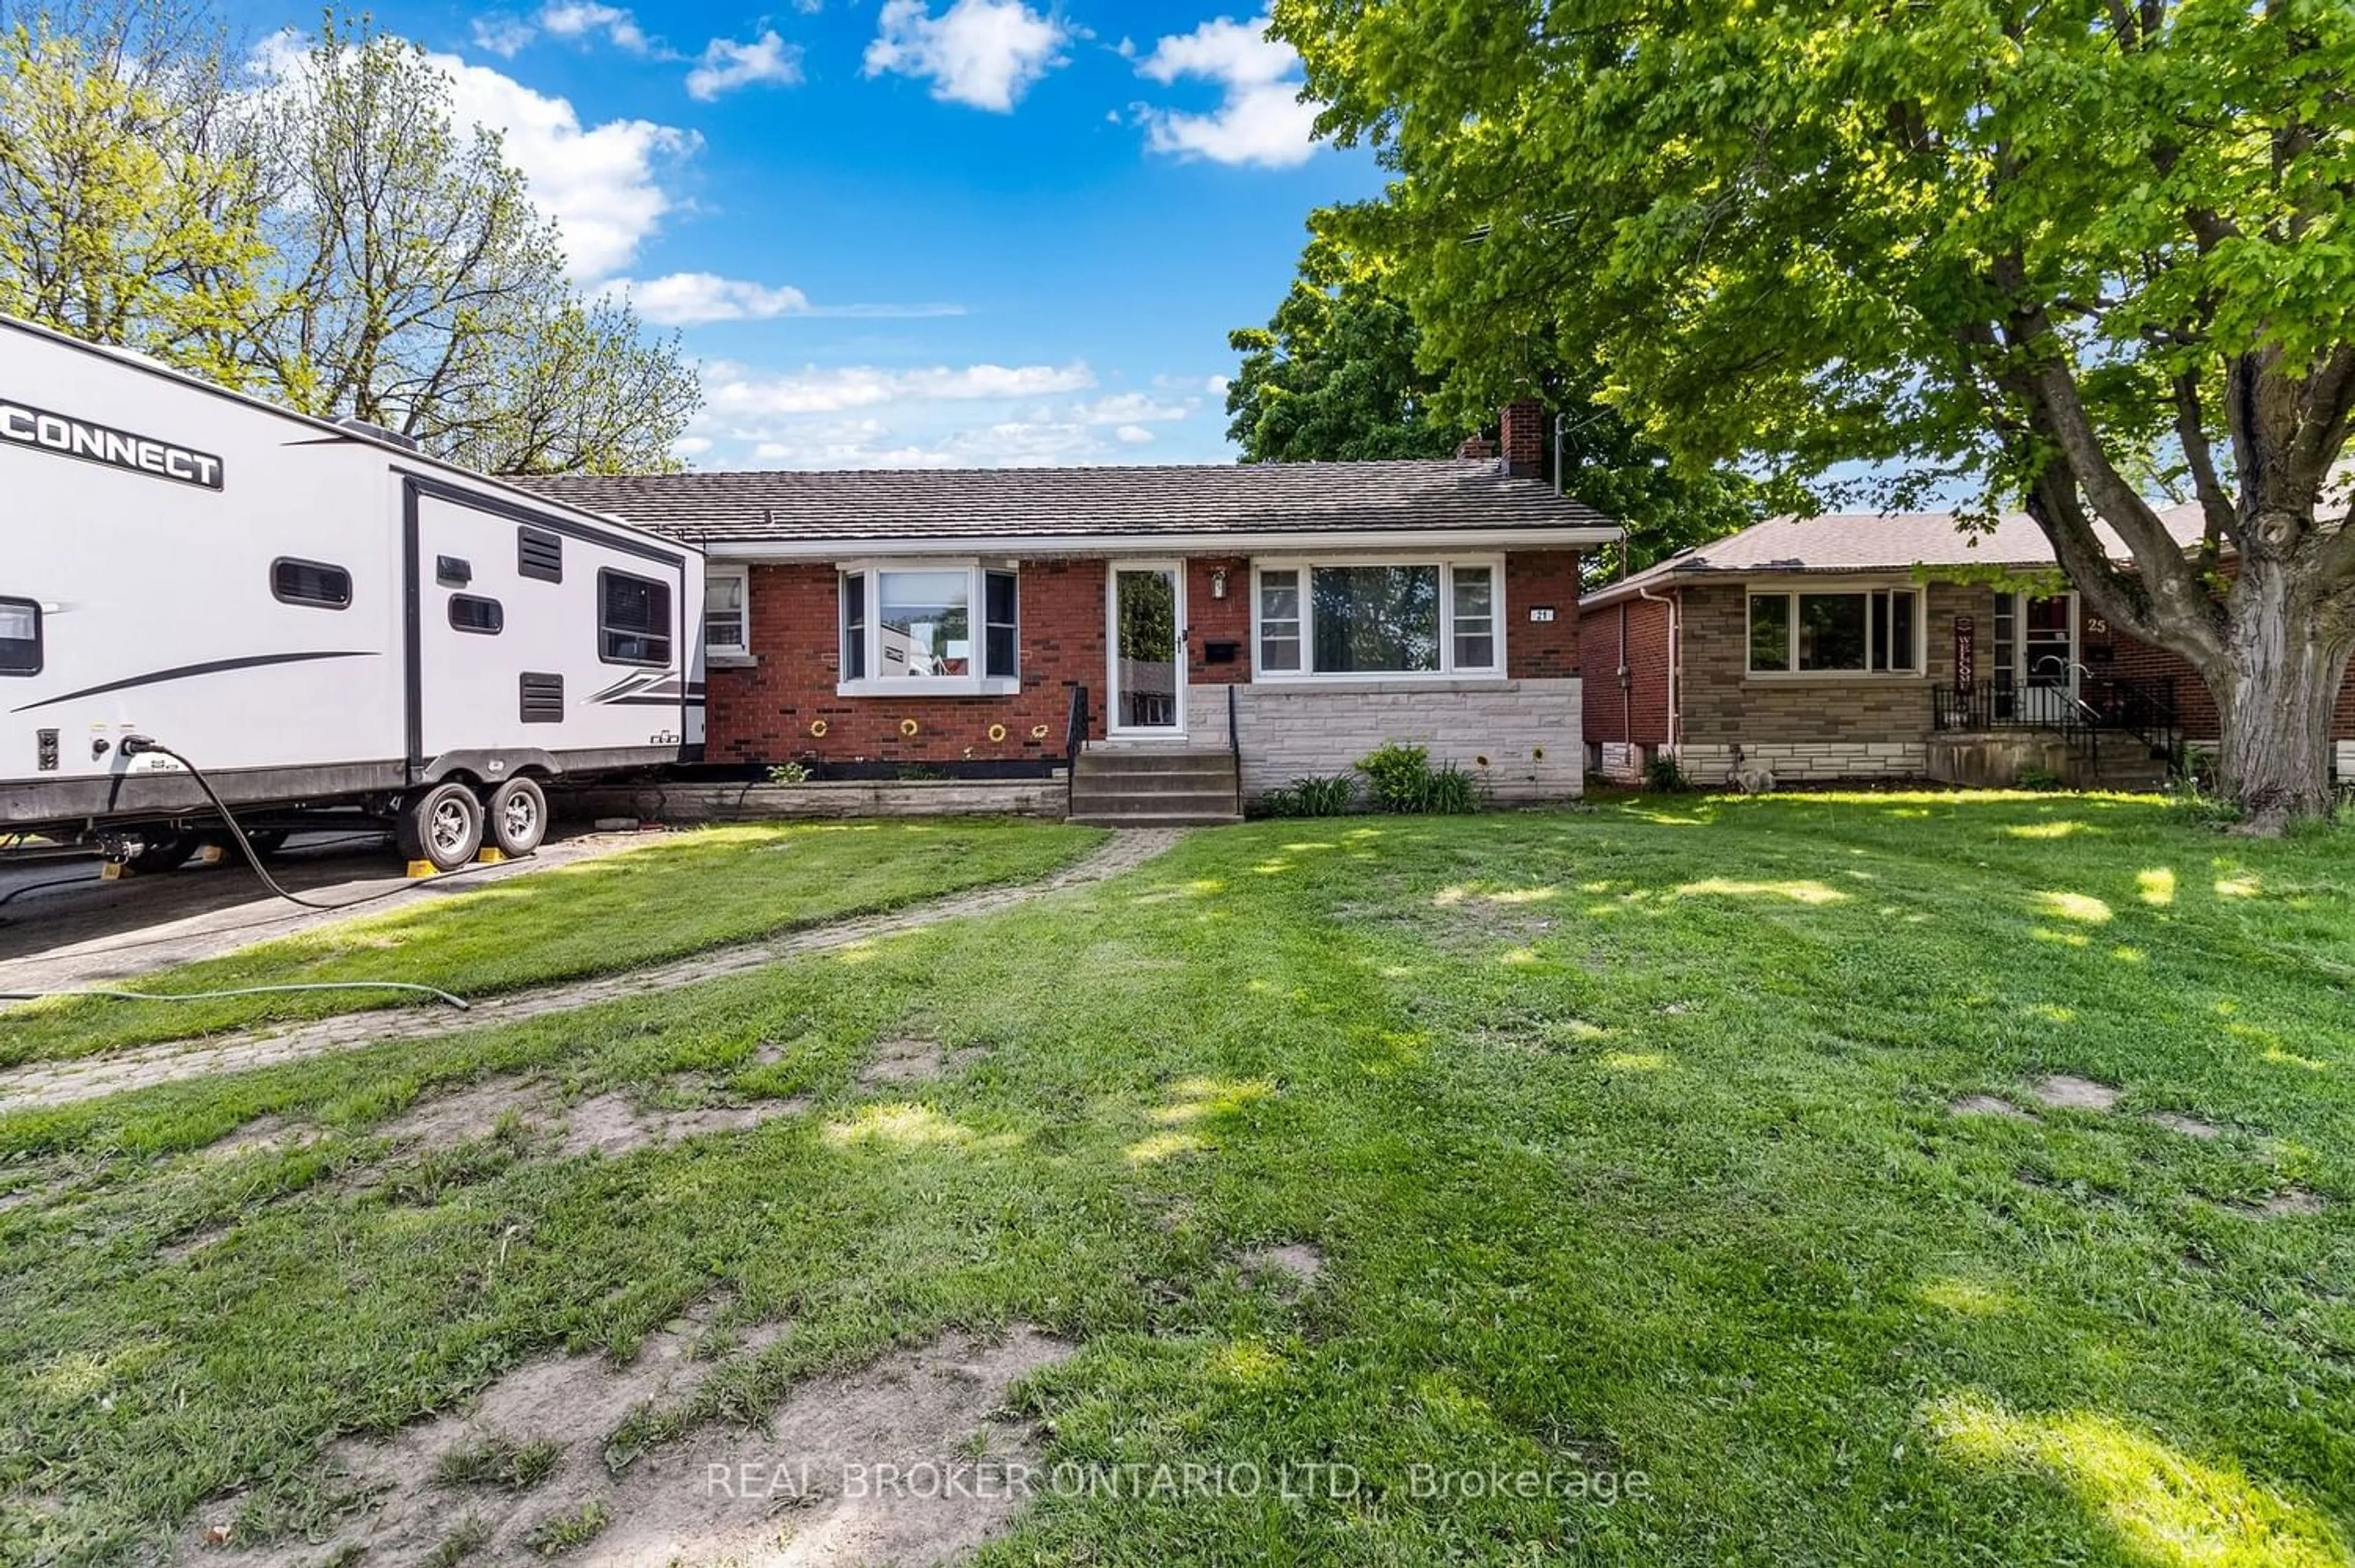 Frontside or backside of a home for 21 Lindel Cres, Welland Ontario L3C 3S2